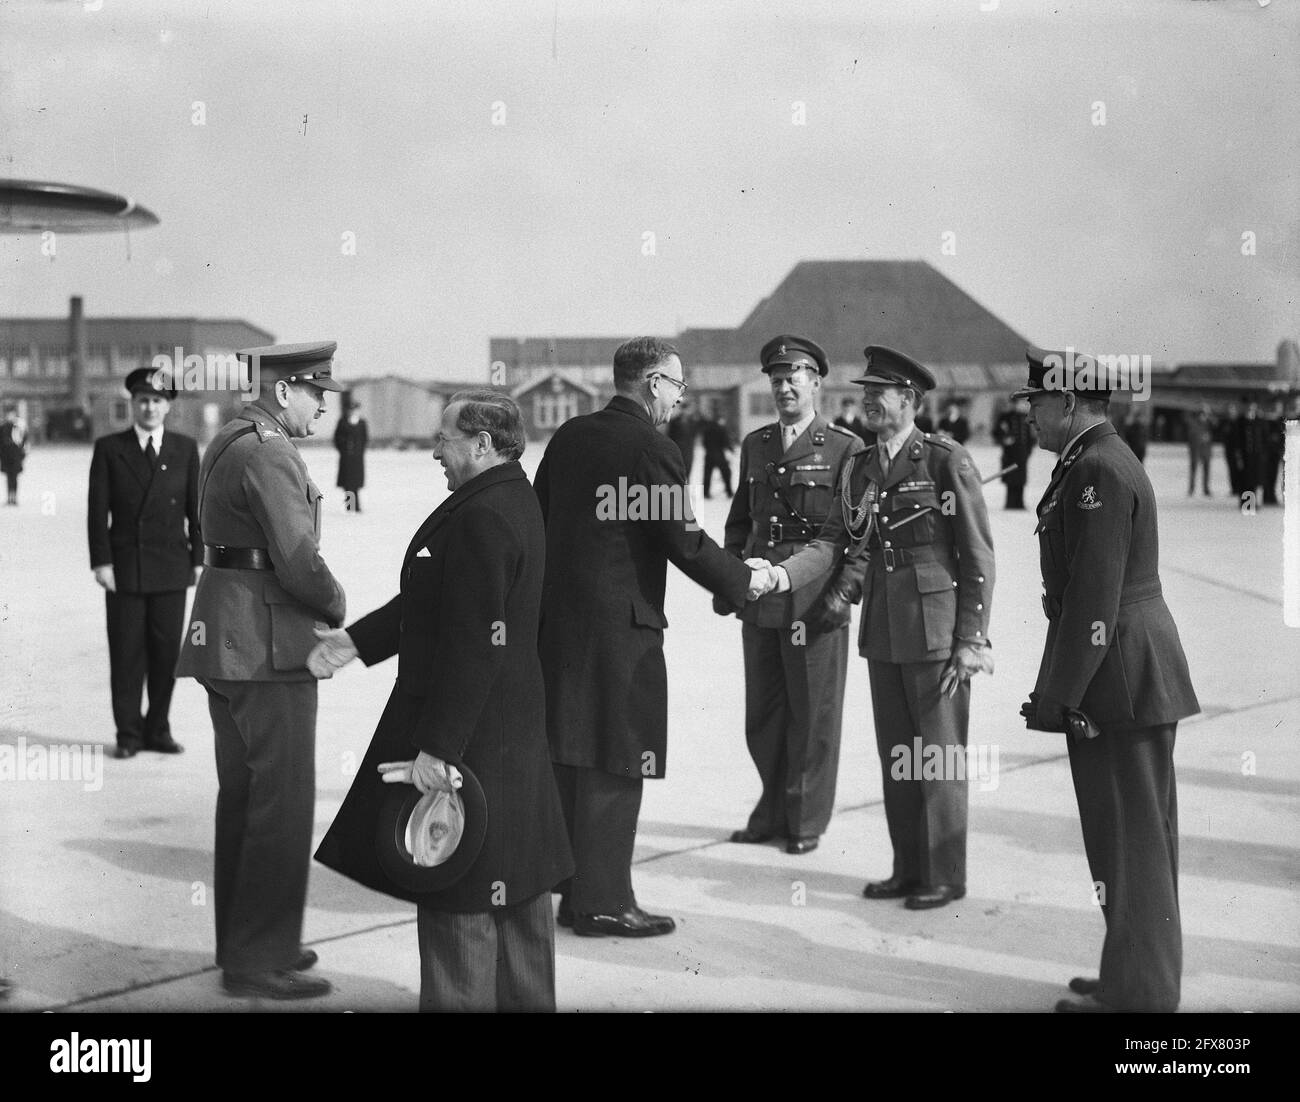 Arrival at Schiphol from Canada Minister Brooke Claxton, March 26, 1950, ARRIVAL, The Netherlands, 20th century press agency photo, news to remember, documentary, historic photography 1945-1990, visual stories, human history of the Twentieth Century, capturing moments in time Stock Photo